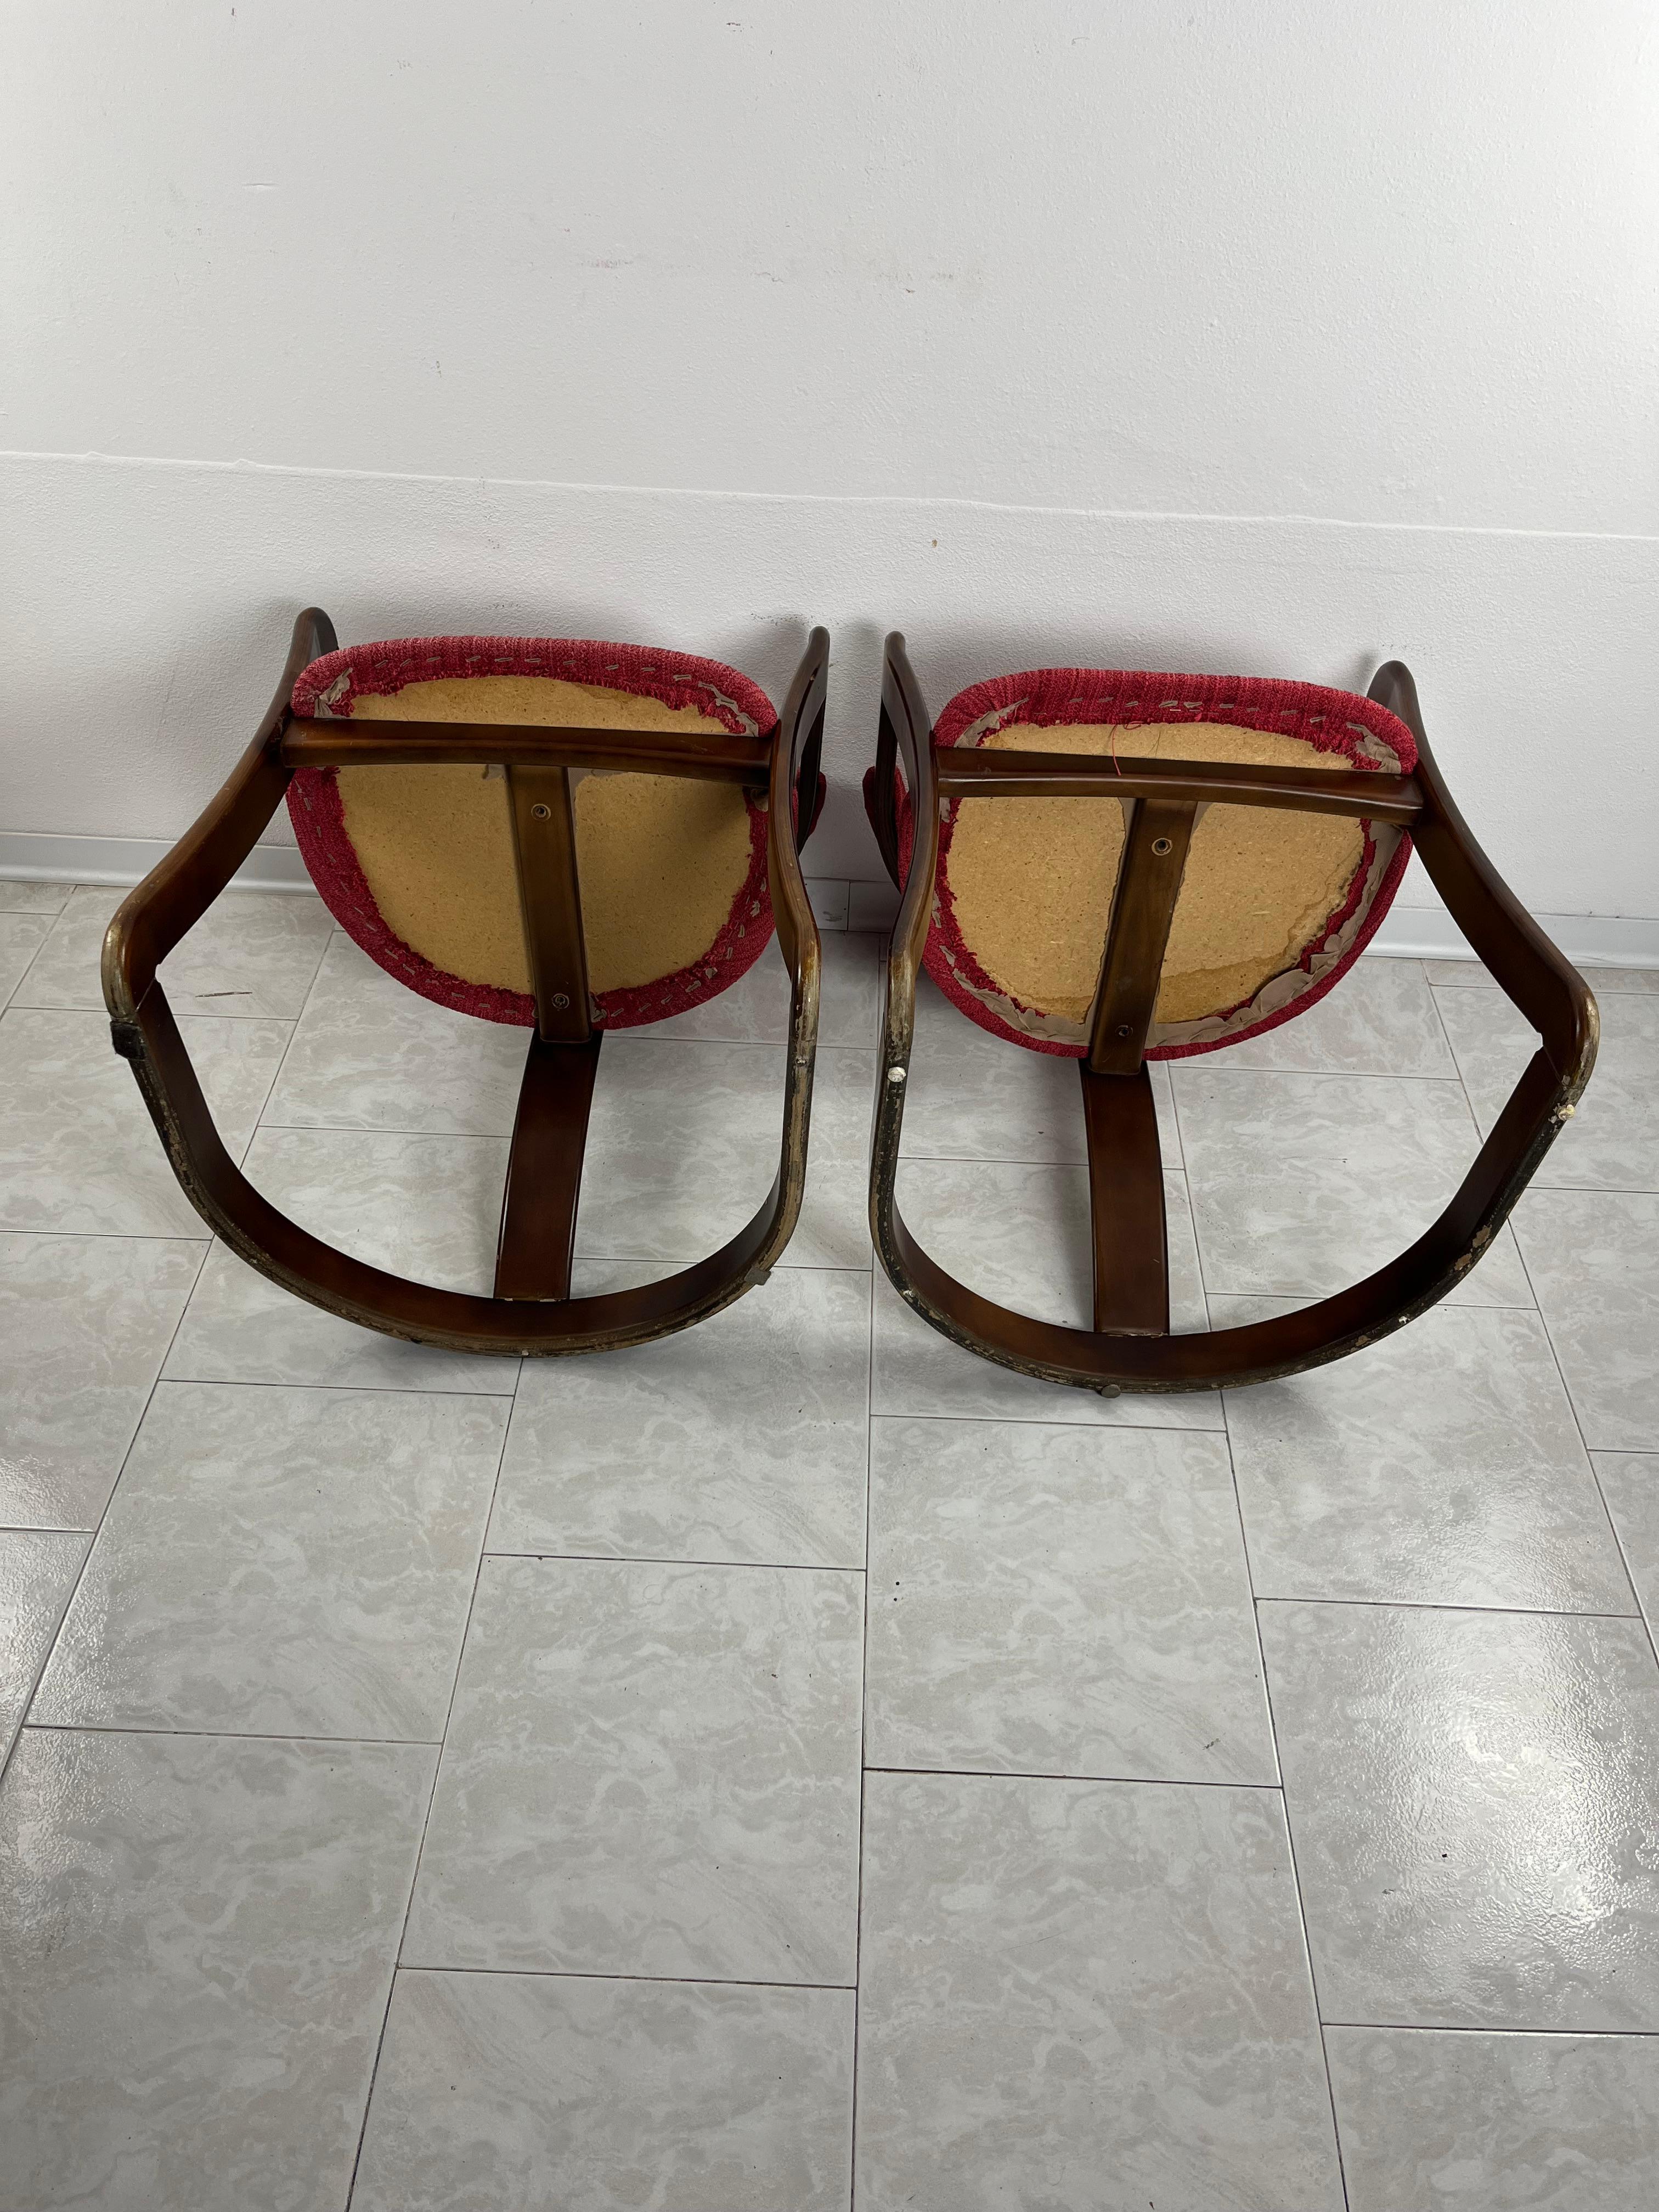 Set of 2 Mid-Century Curved Wooden Chairs Attributed to A. & P. Castiglioni For Sale 2